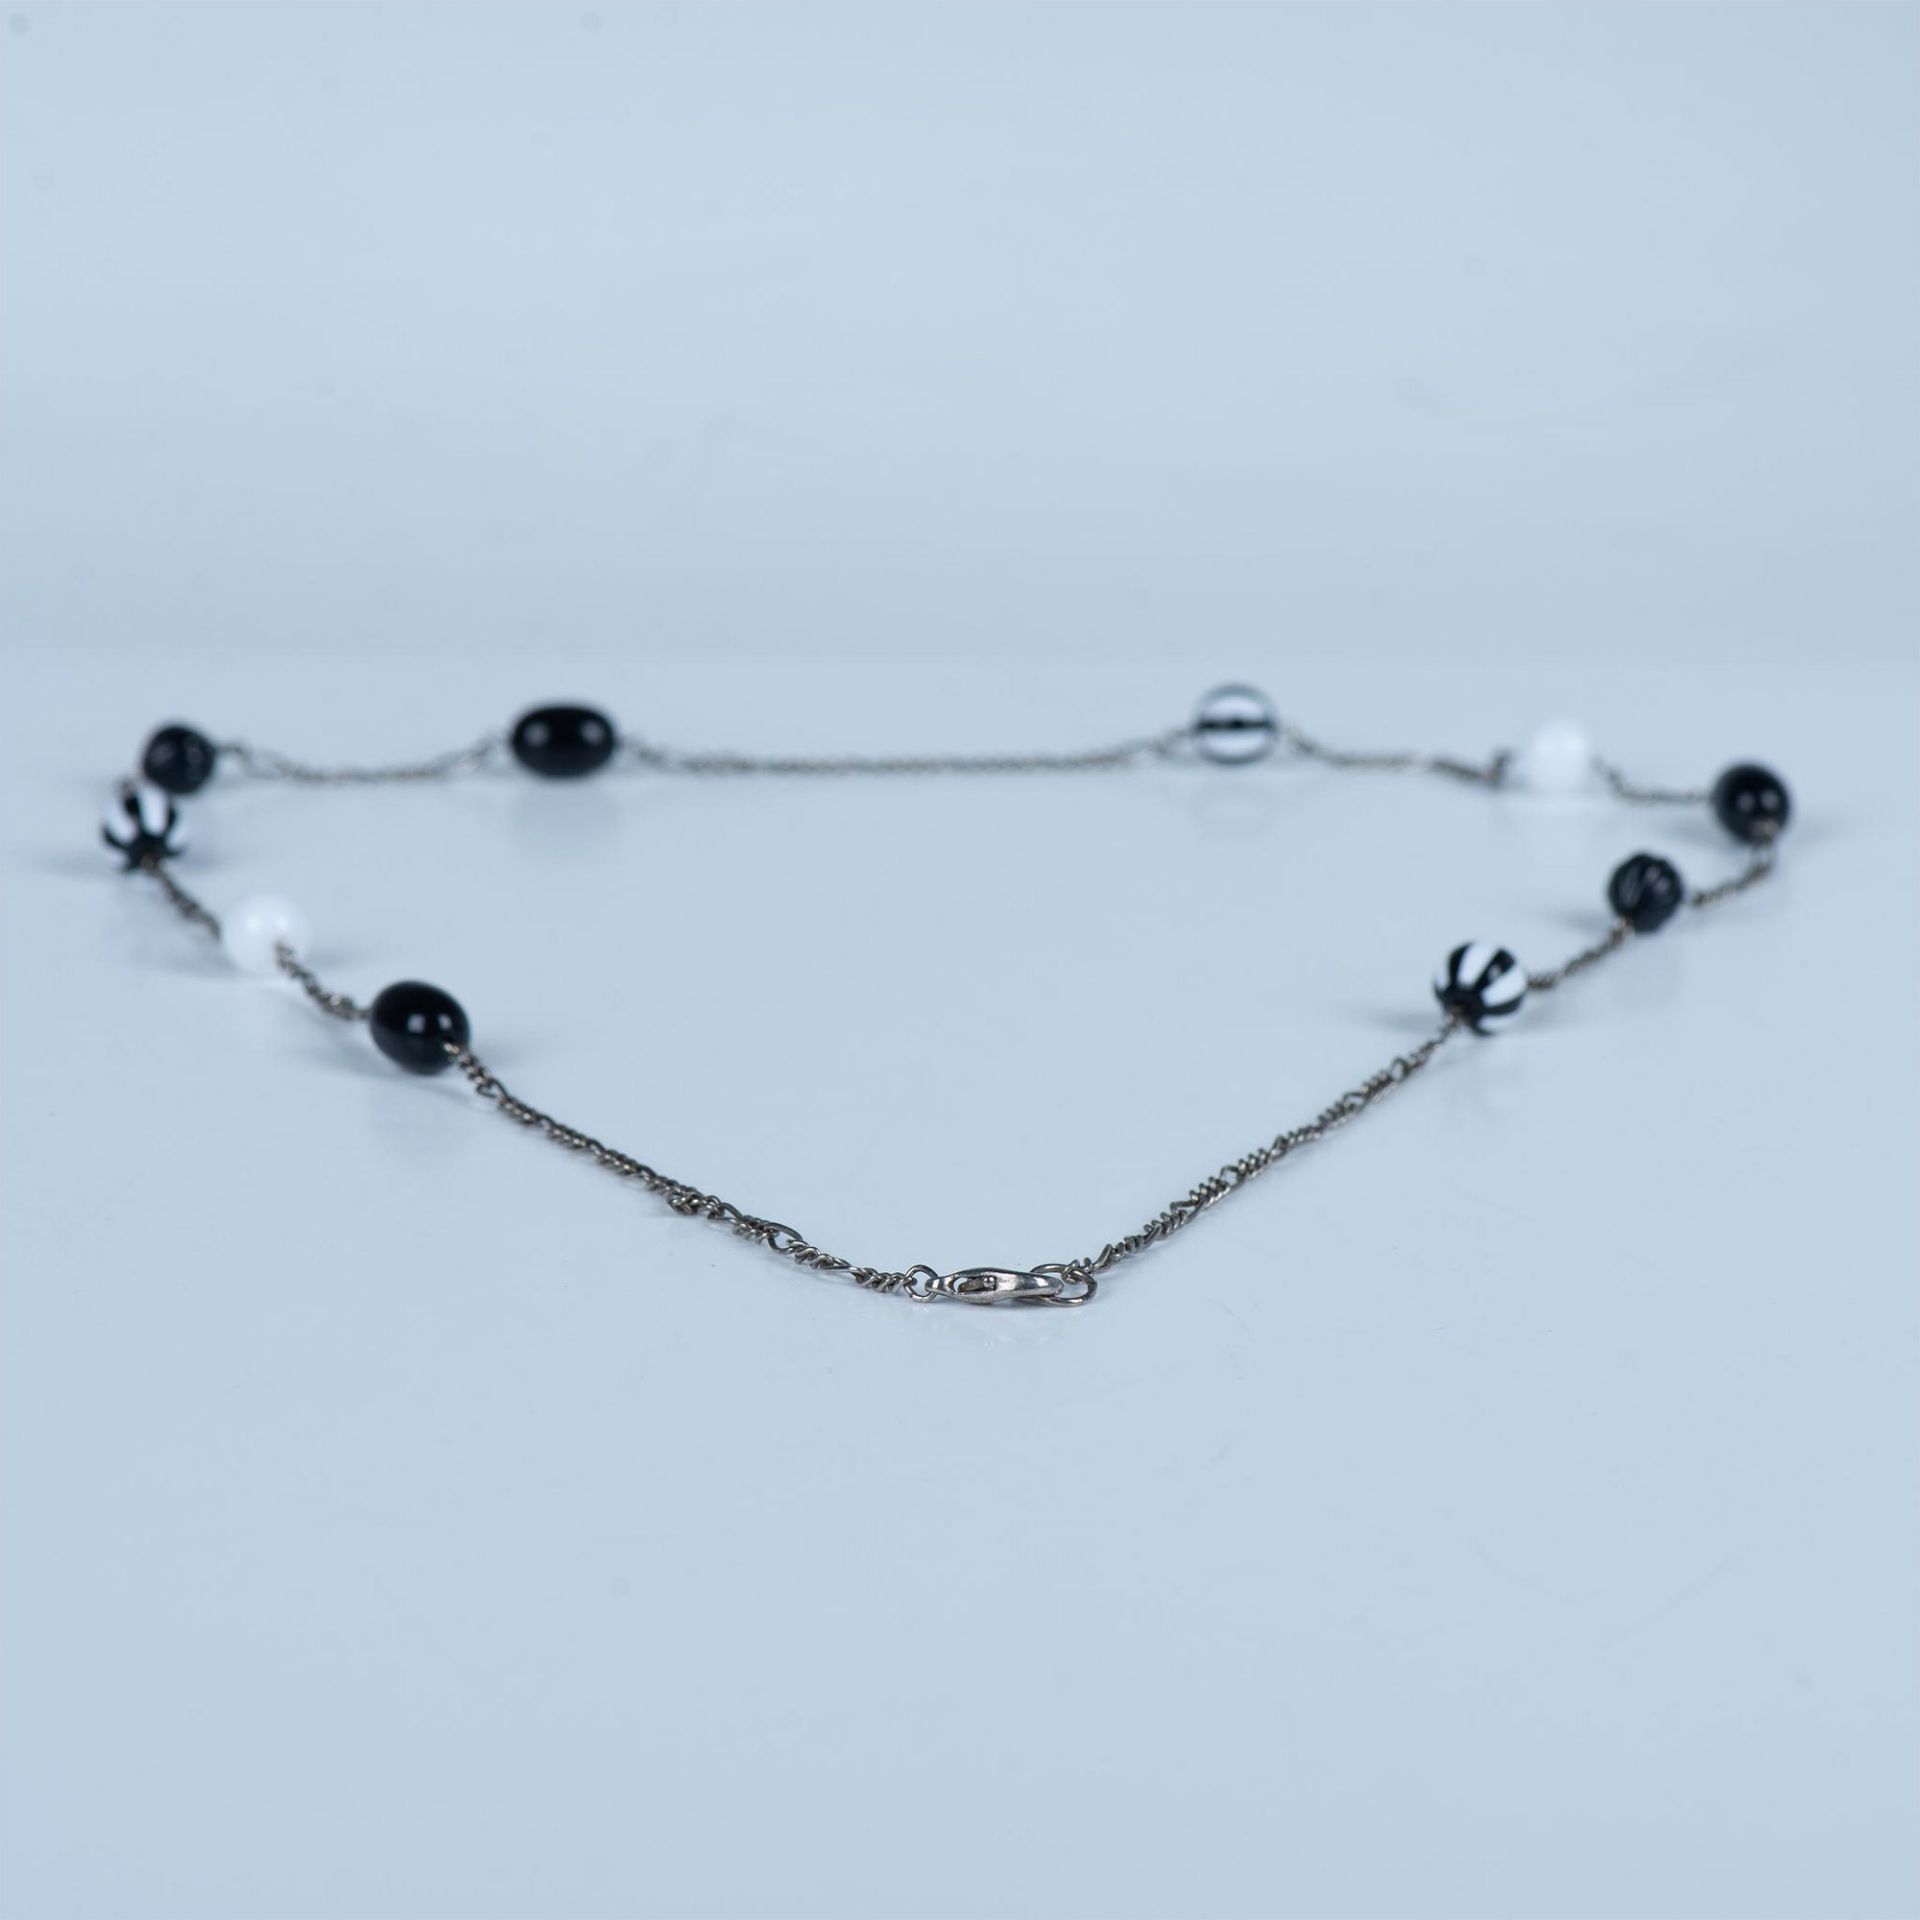 Cute Silver Metal Black & White Beads Necklace - Image 3 of 3